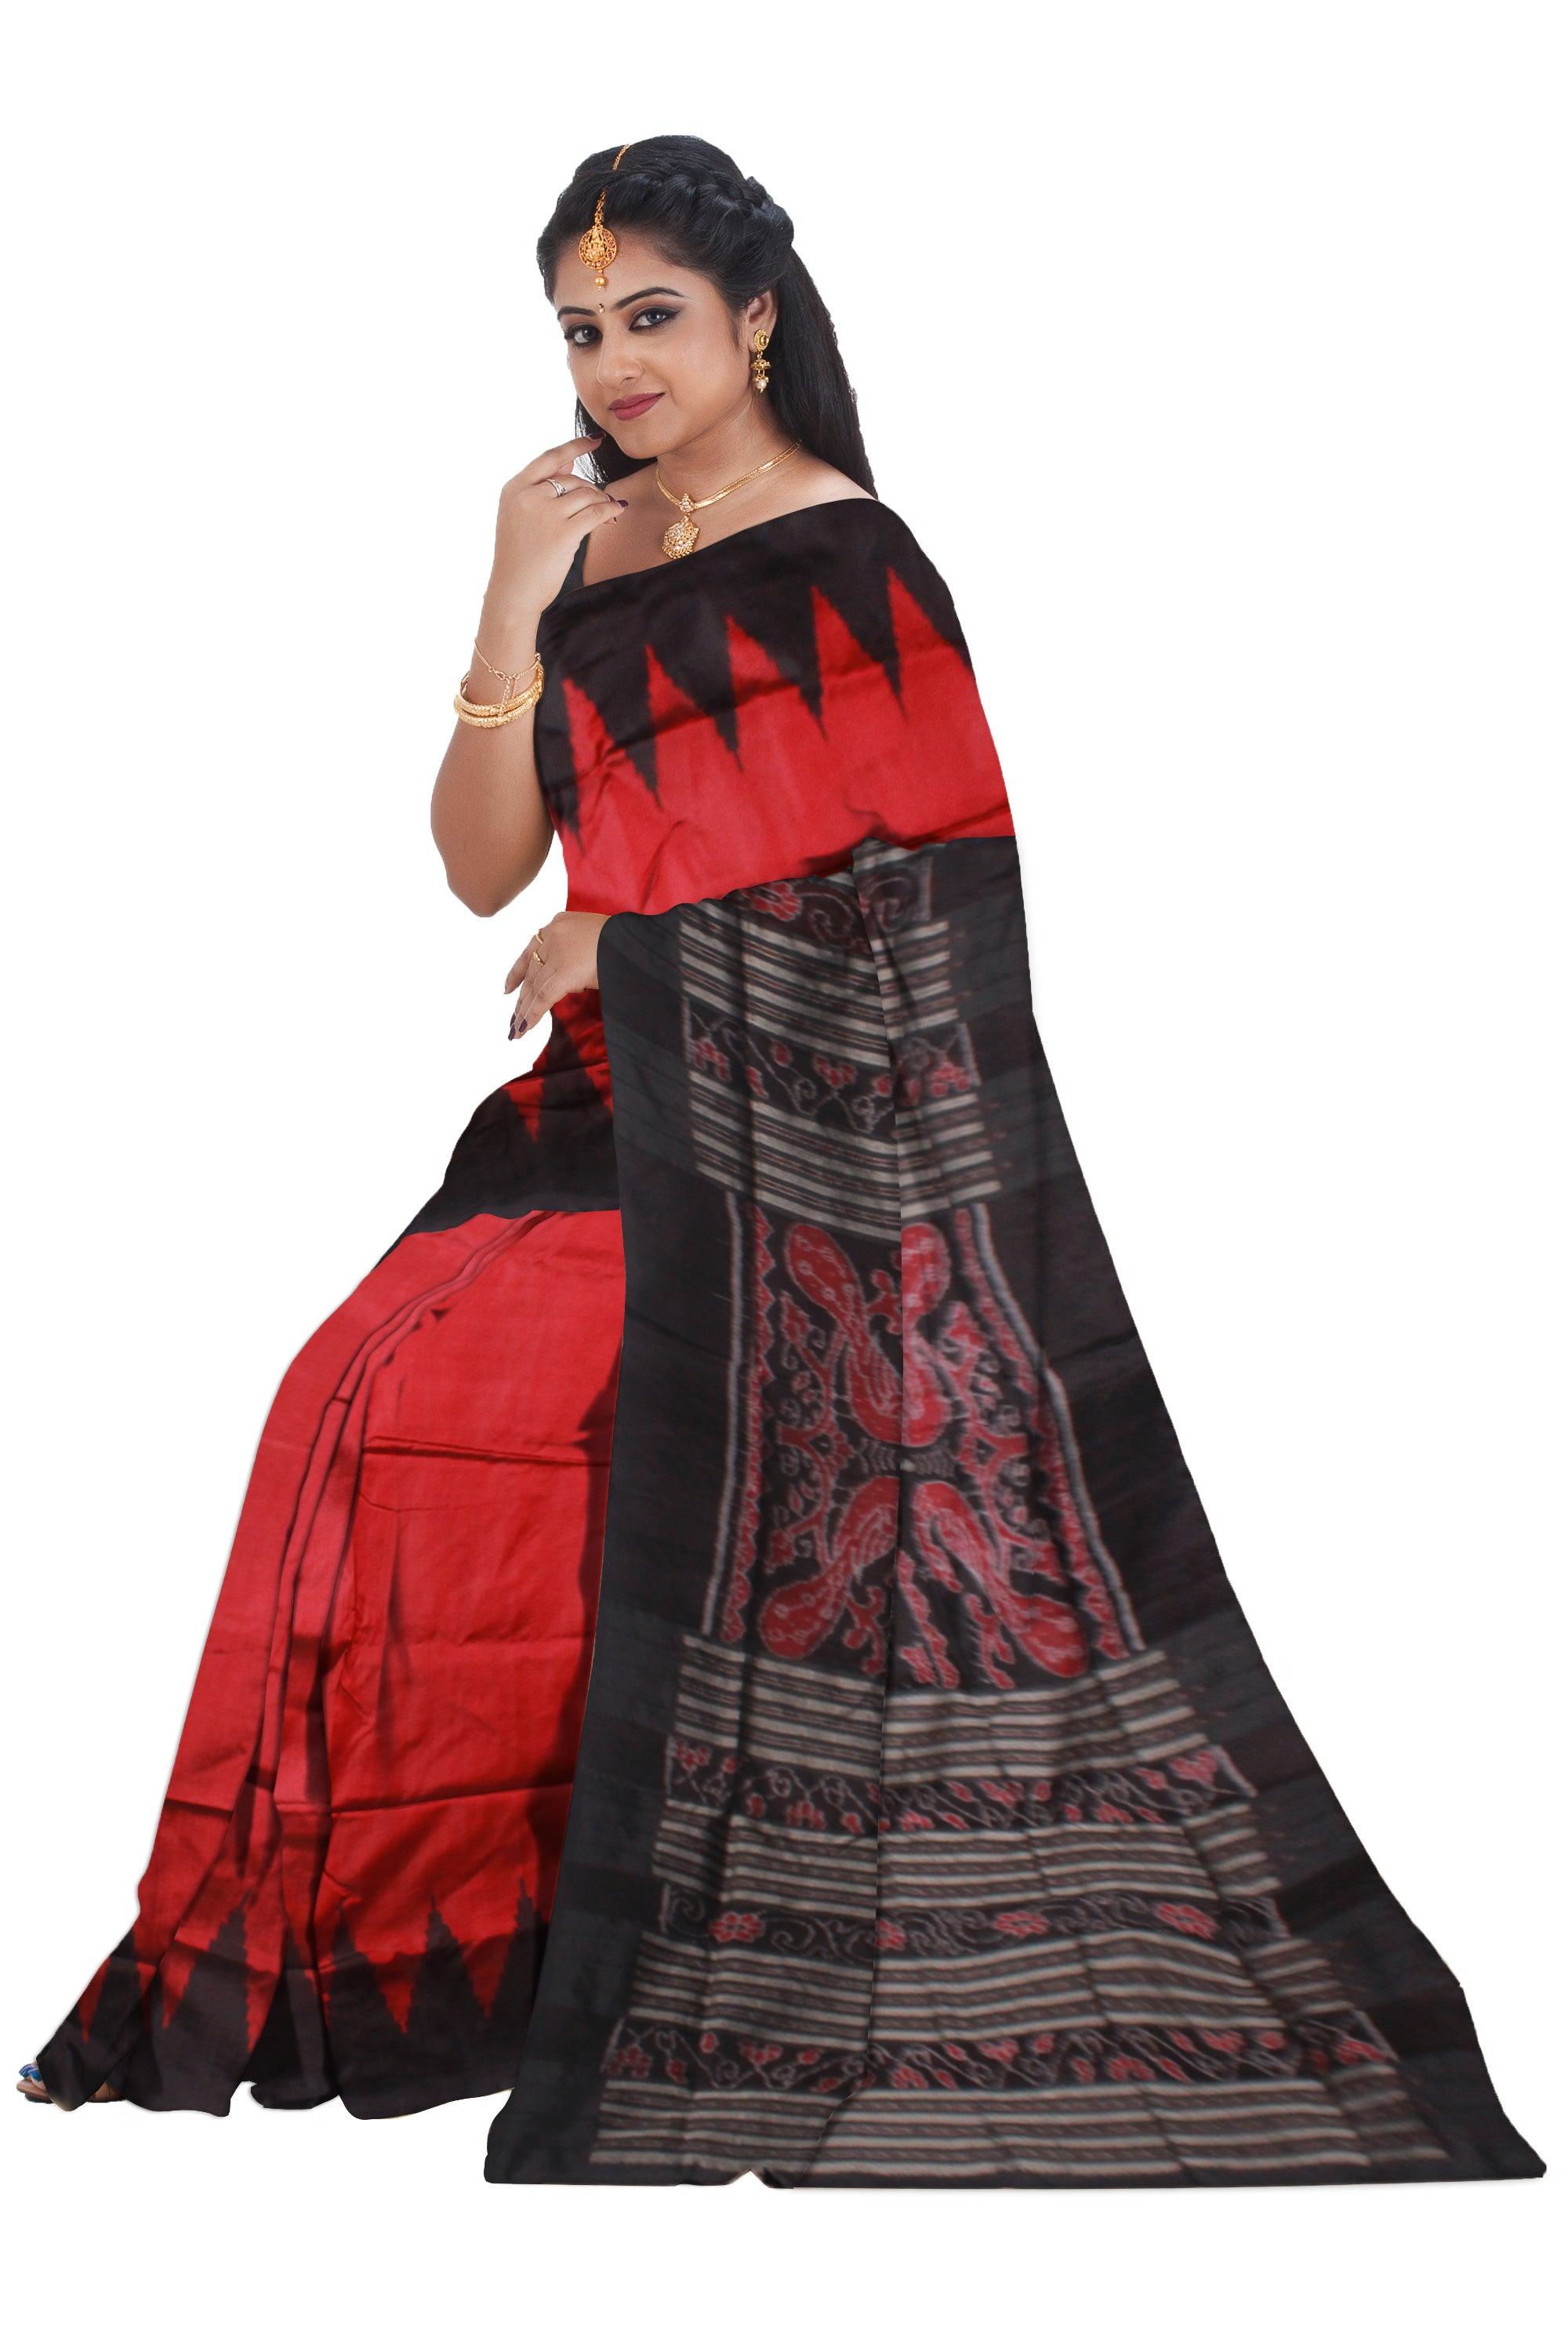 A KARGIL PATA SAREE IN MAROON AND BLACK COLOR BASE, ATTACHED WITH BLOUSE PIECE. - Koshali Arts & Crafts Enterprise